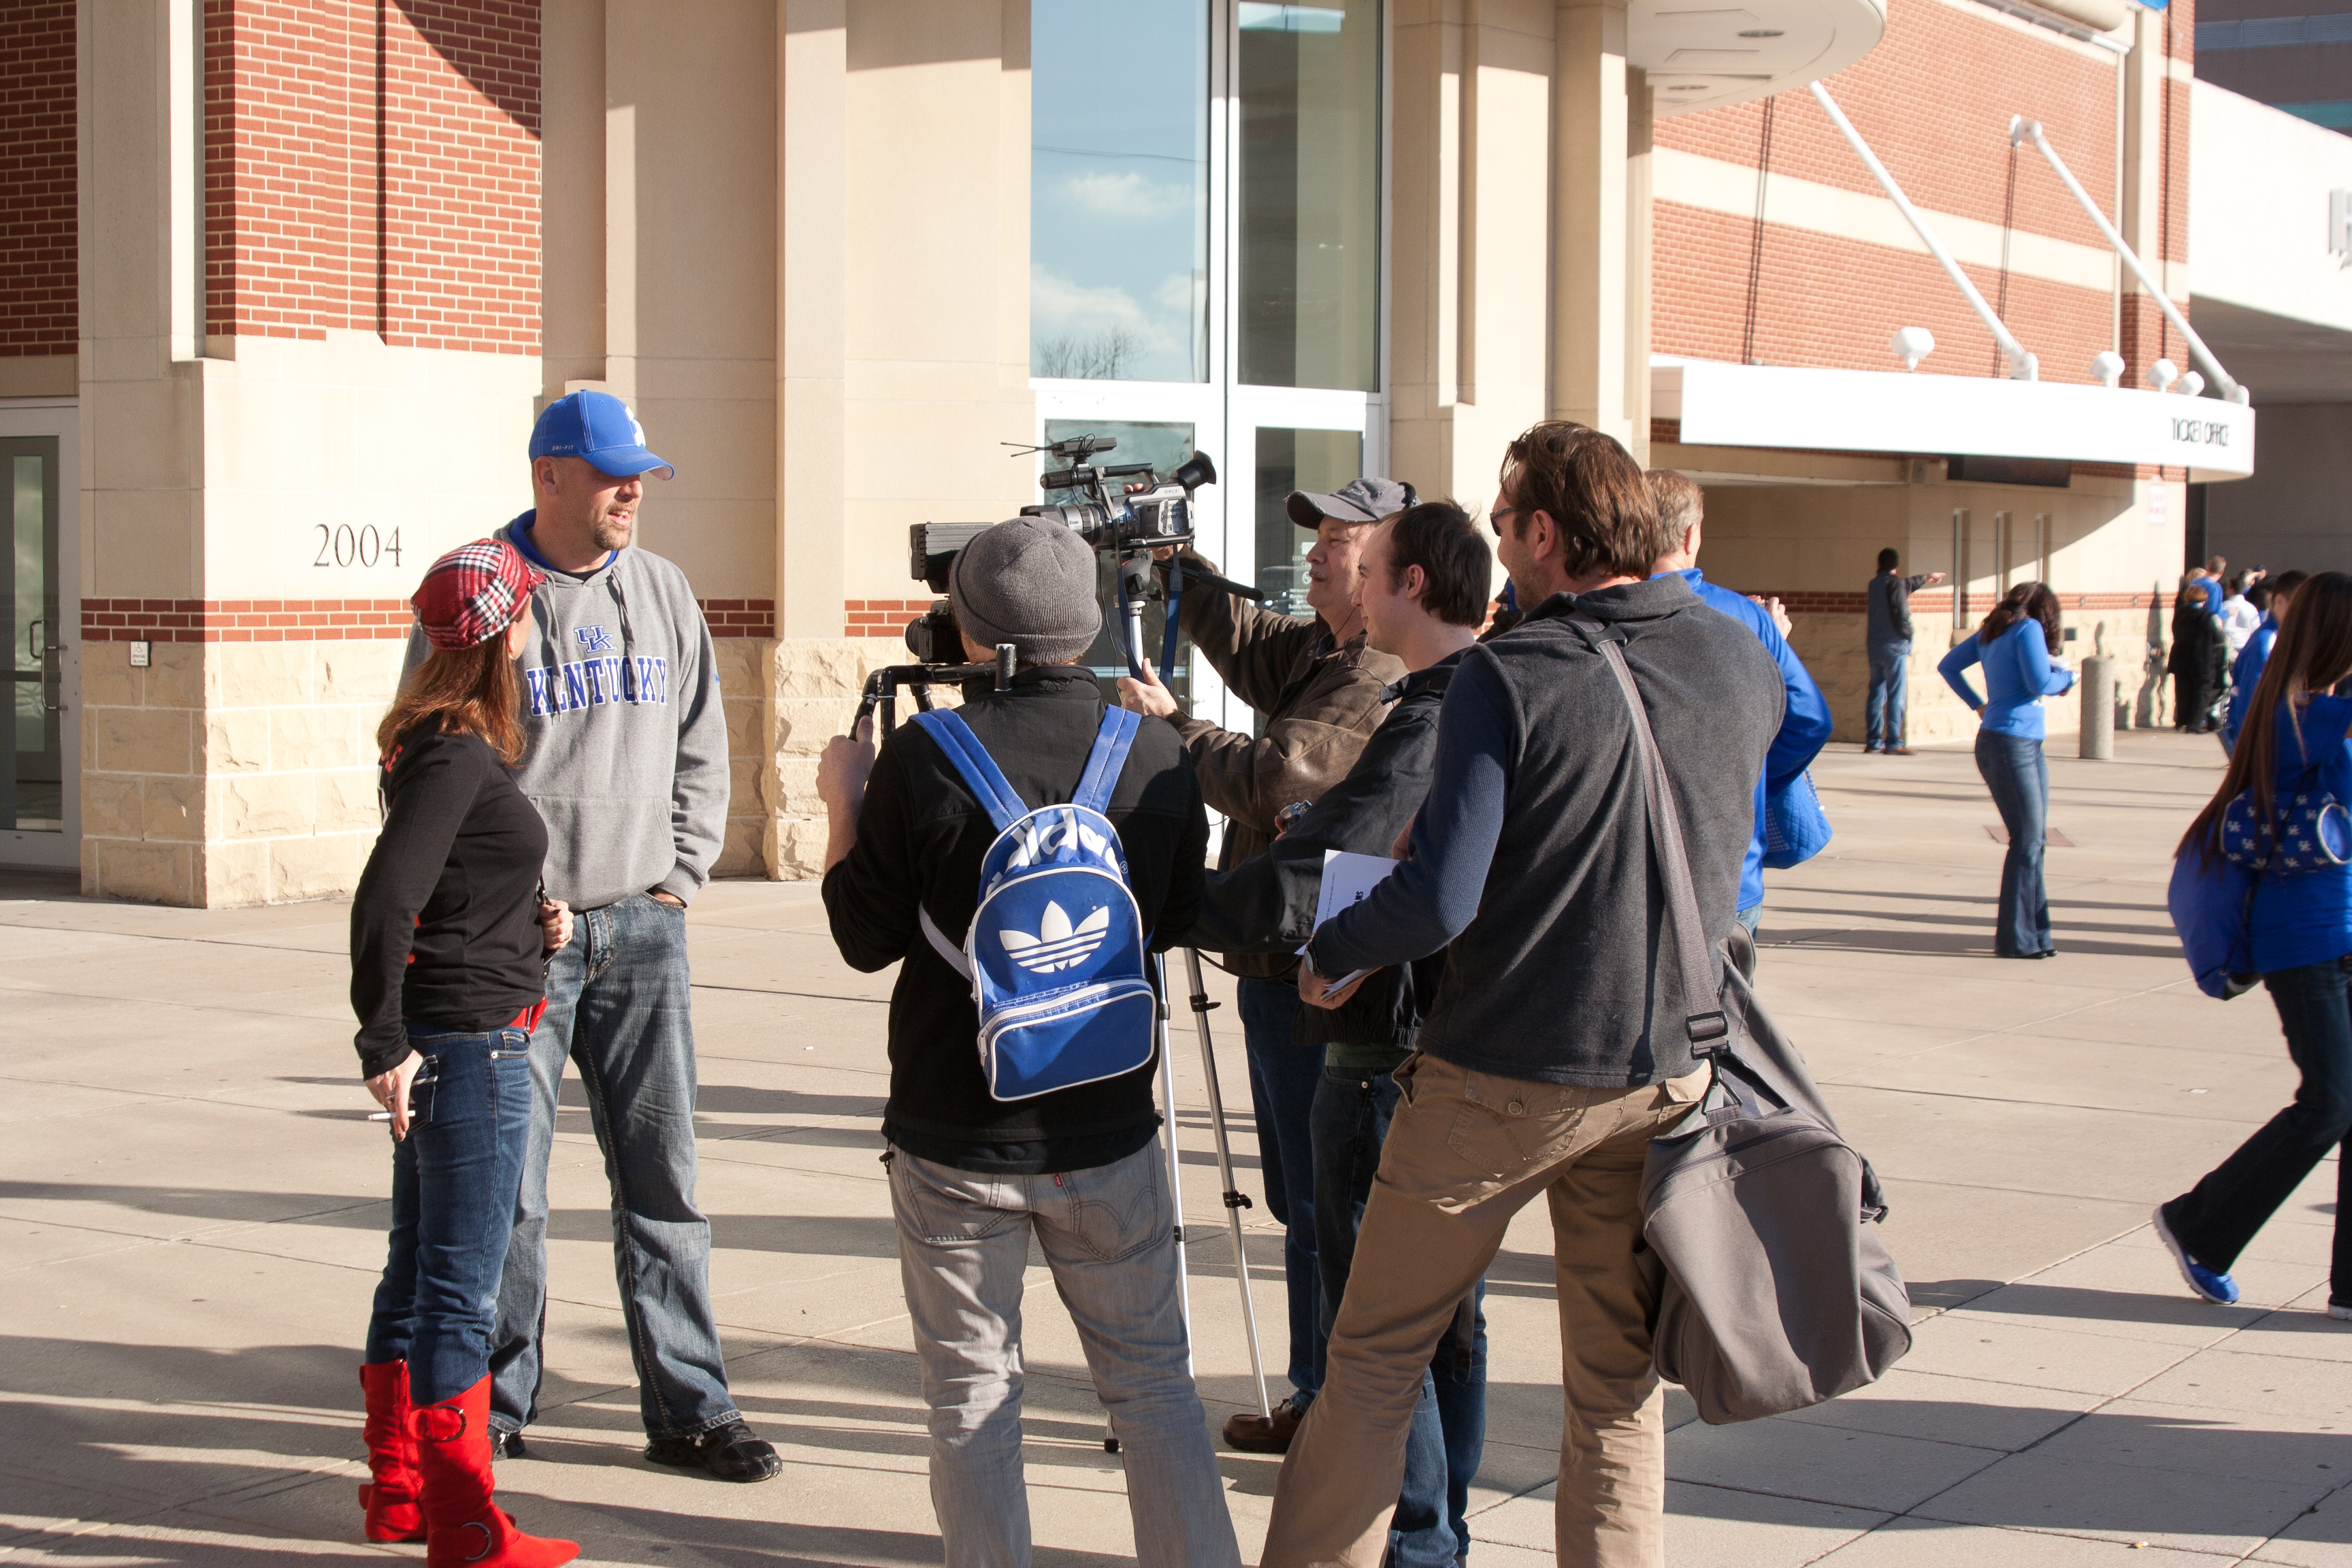 Interview in front of Rupp Arena for the film Red v Blue